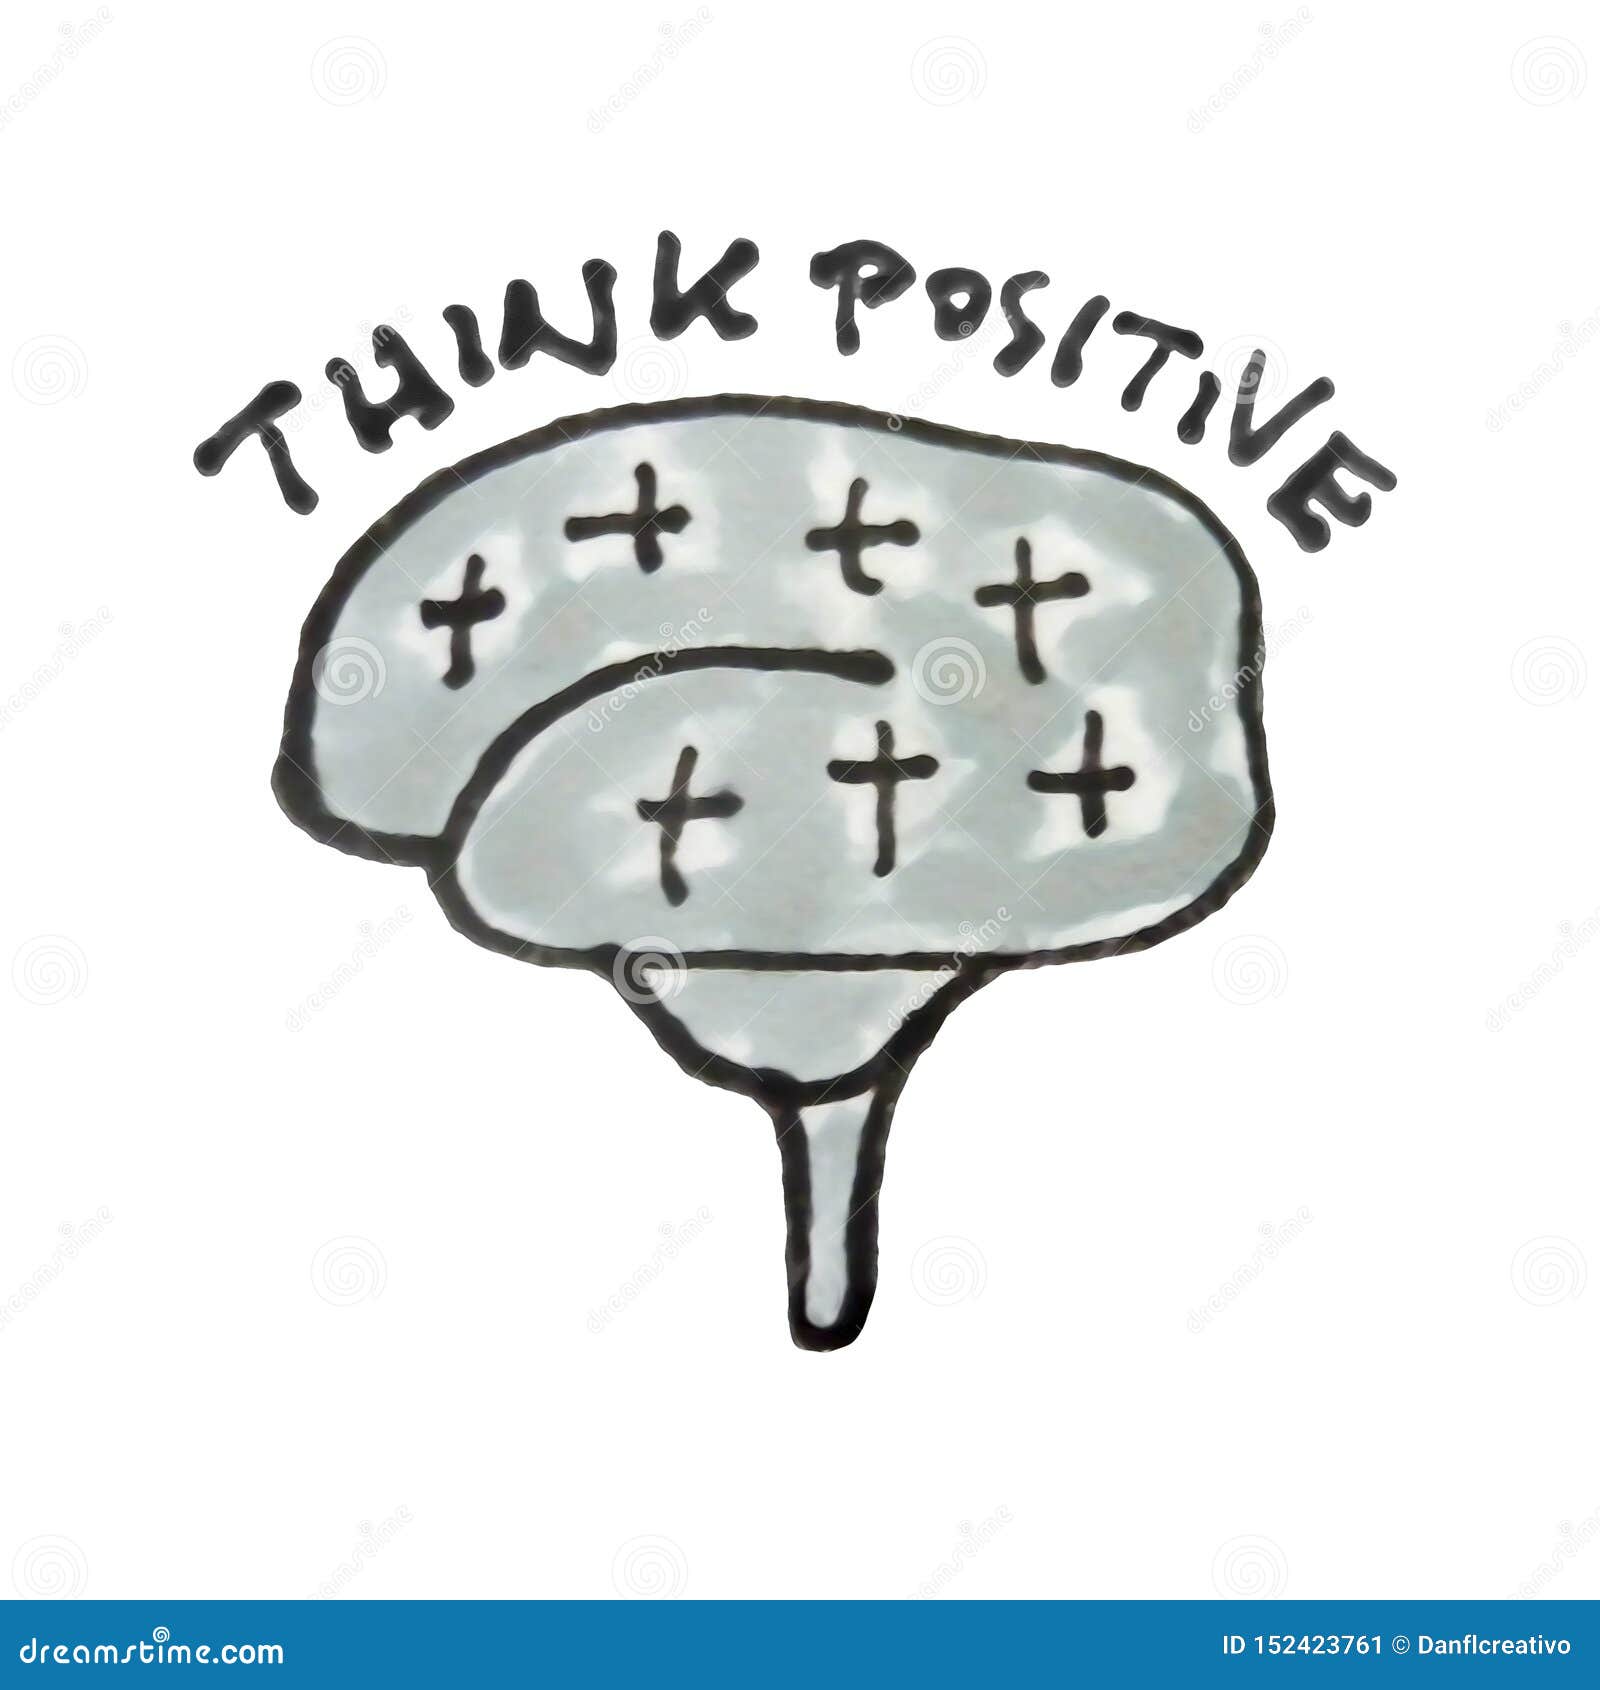 Grow Positive Thoughts  Click to read post  Head to wwwcoacherllccom  for free printables and other superhelpful stuff  Love doodles  Positivity Doodle art